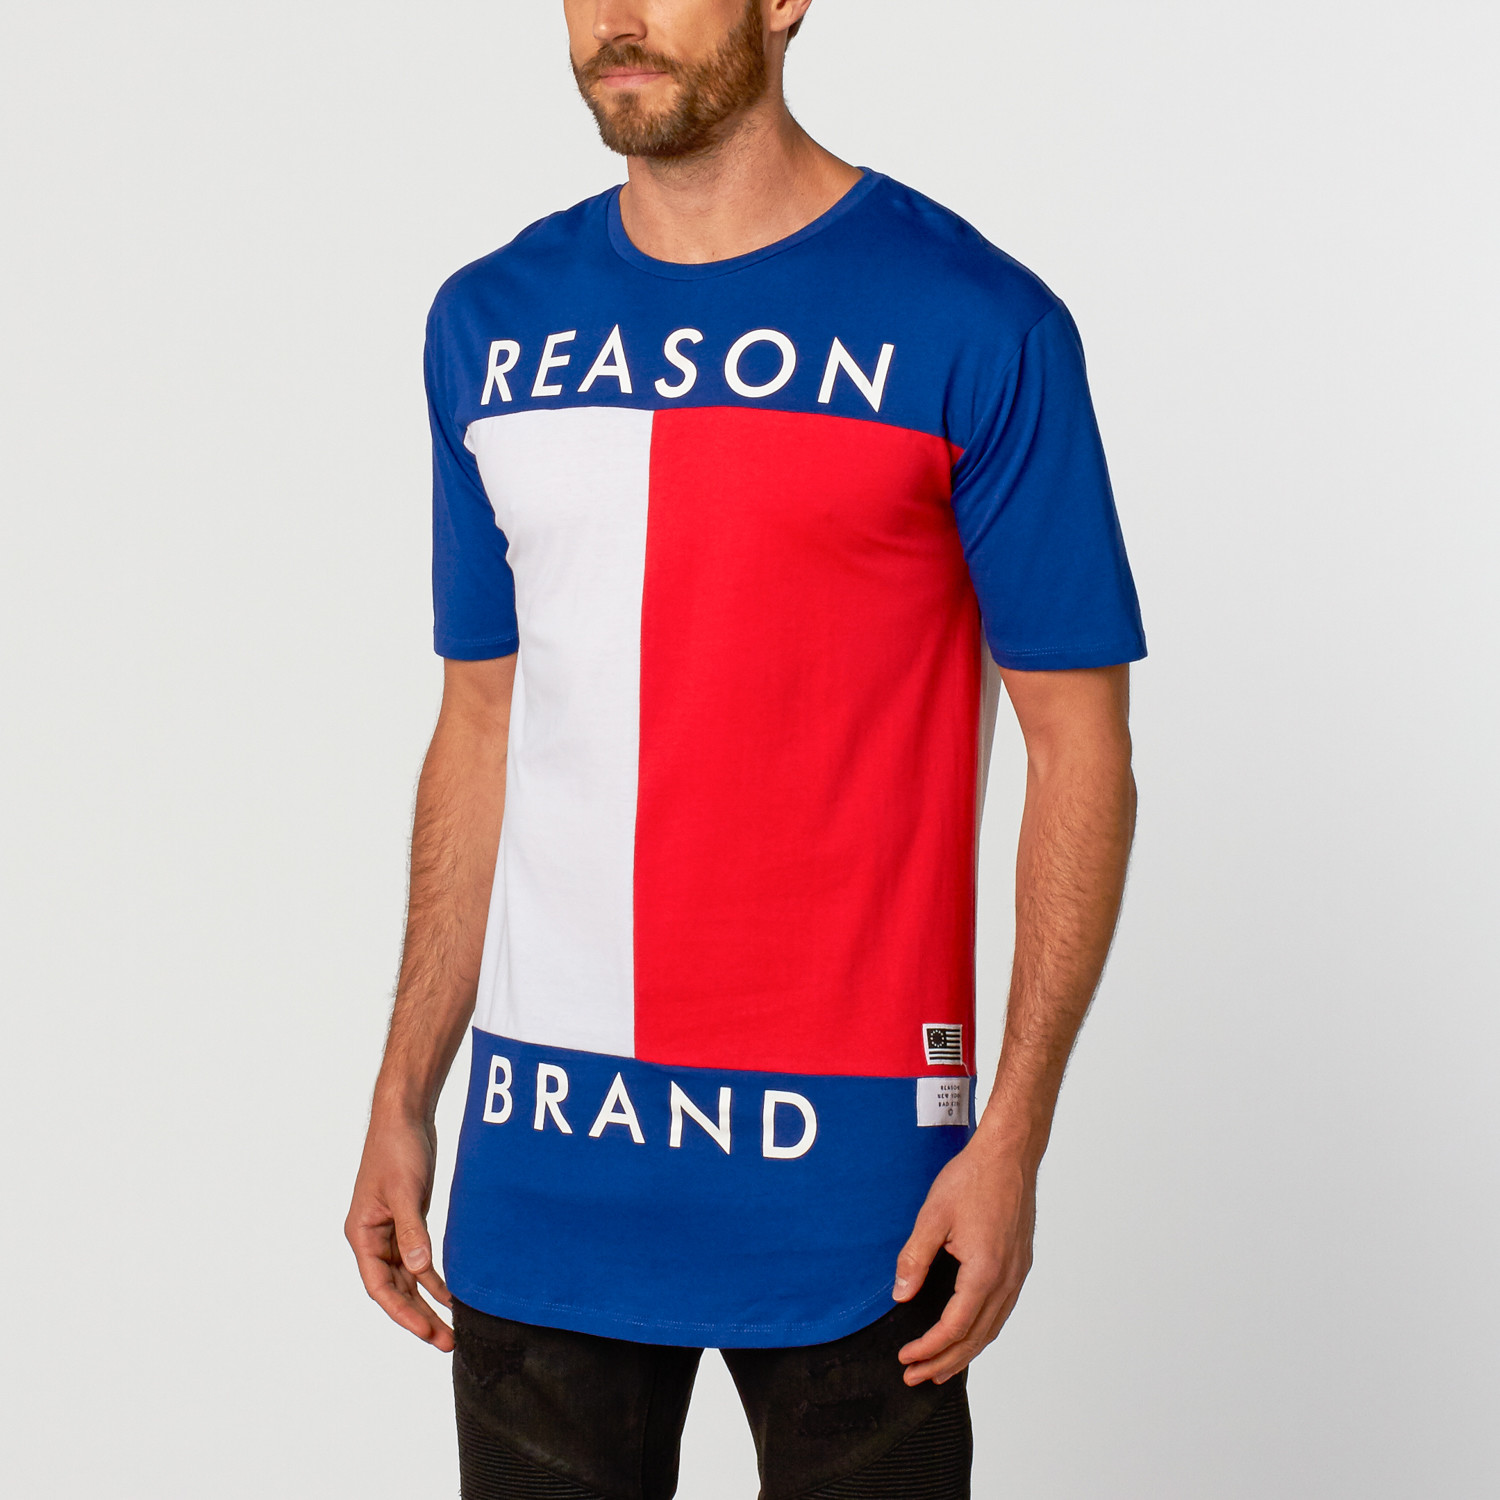 red white and blue graphic tee